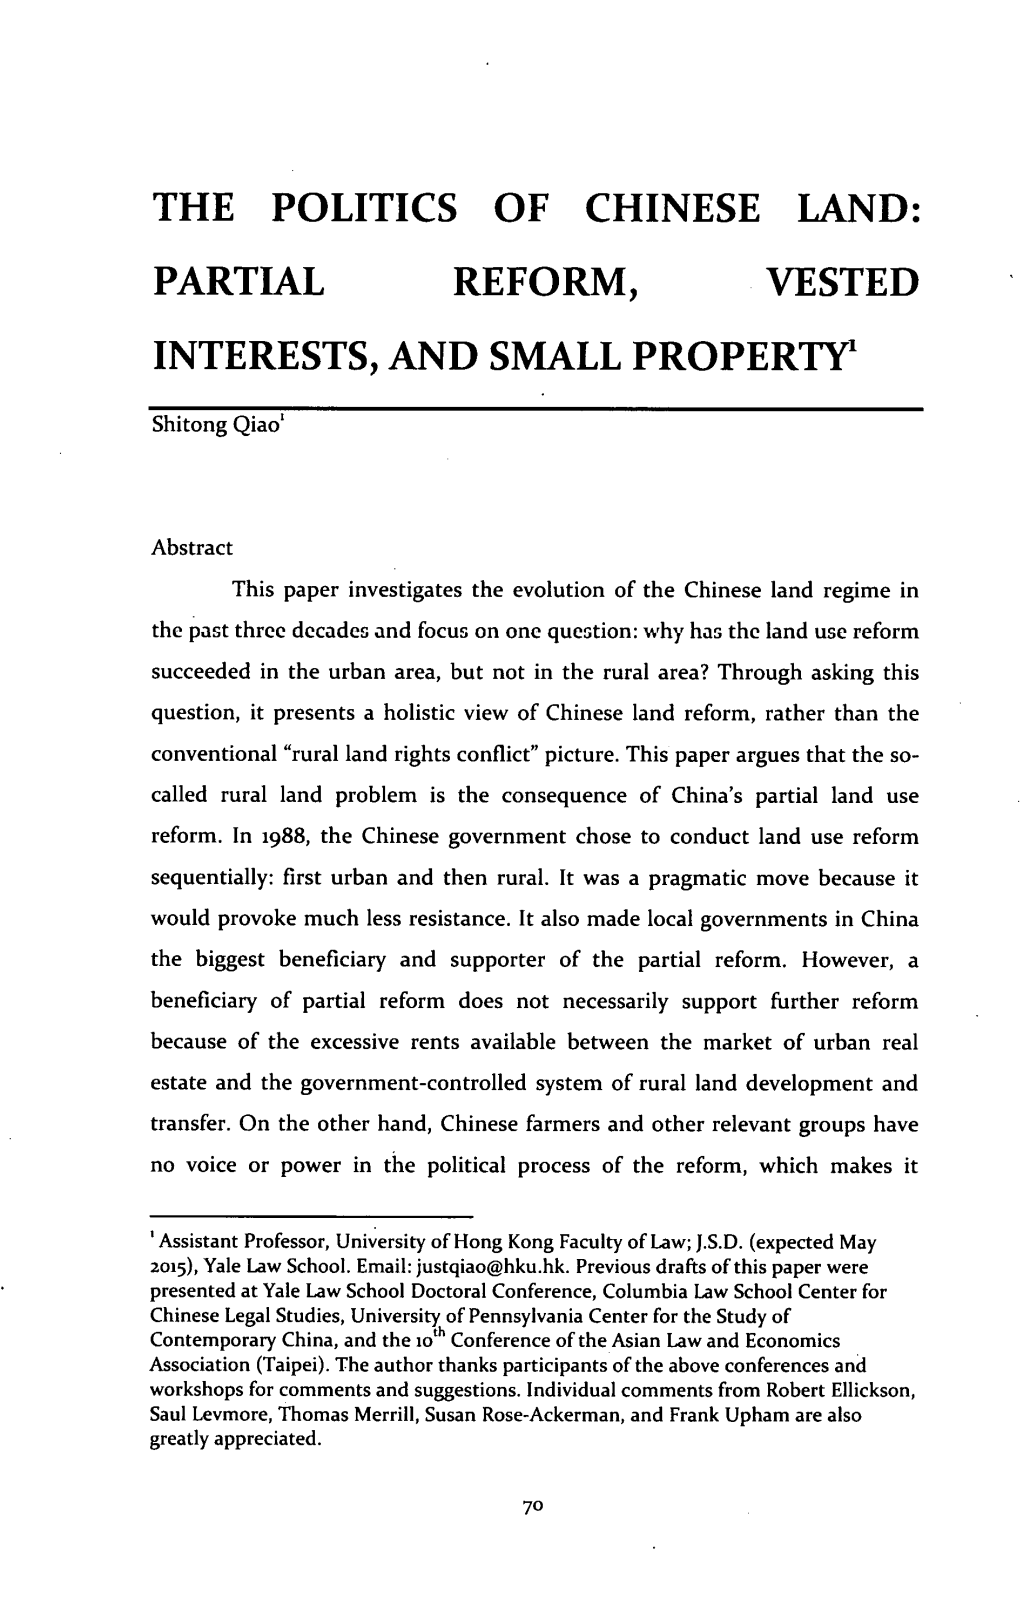 Partial Reform, Vested Interests, and Small Property